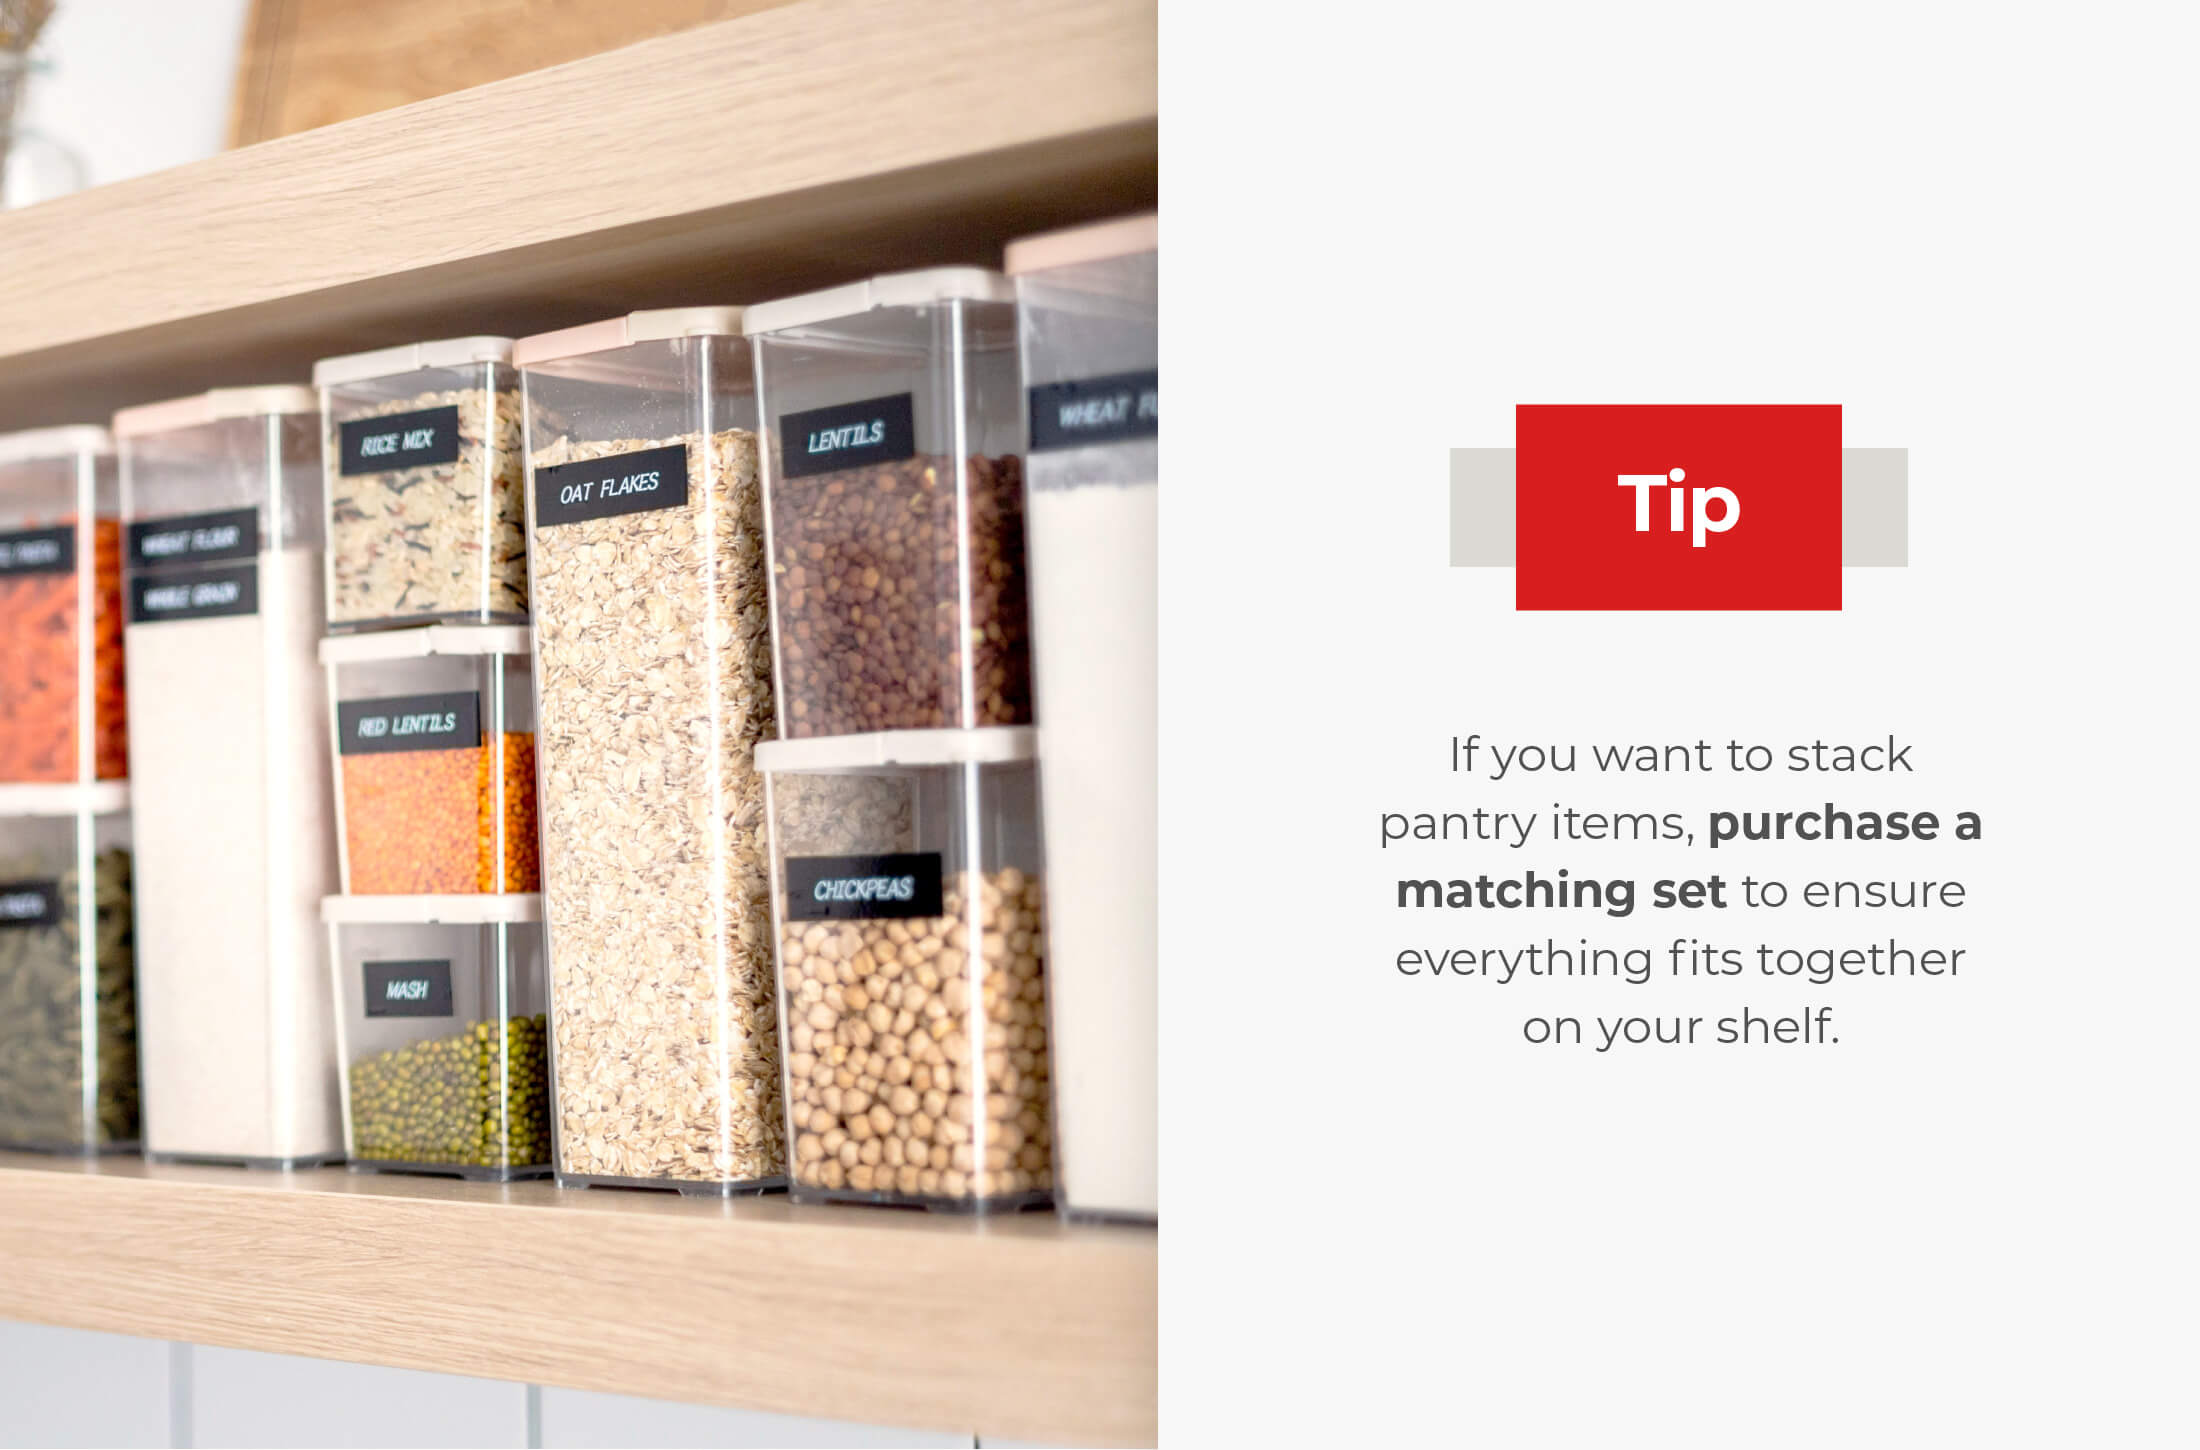 If you want to stack pantry items, purchase a matching set to ensure everything fits together on your shelf.